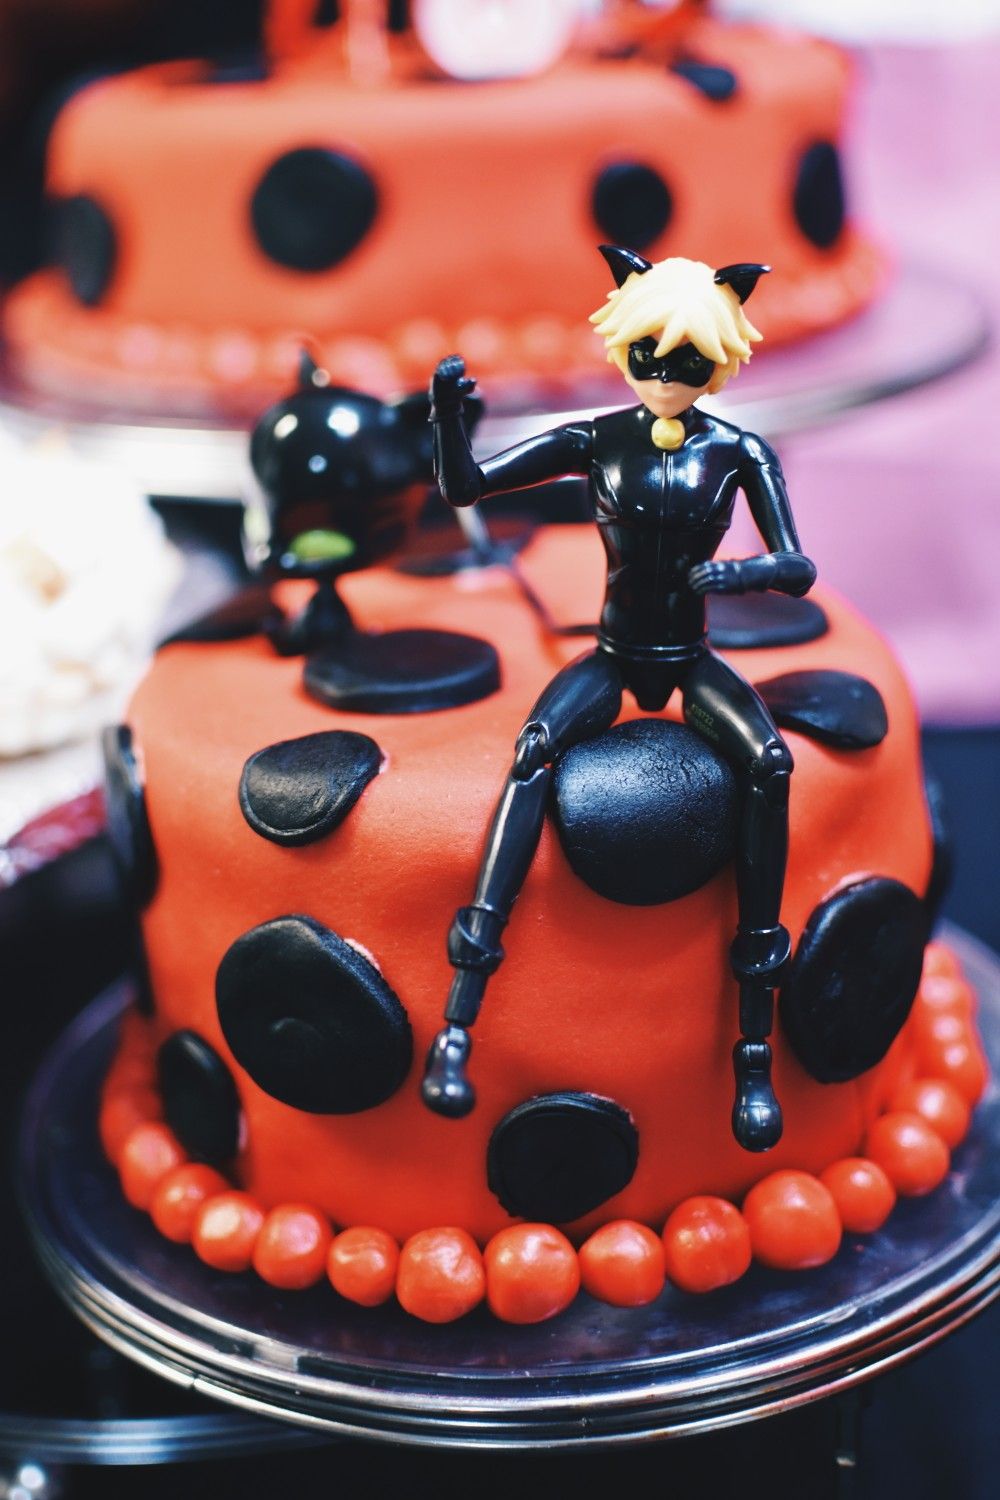 Miraculous ladybug and cat noir themed birthday party cake